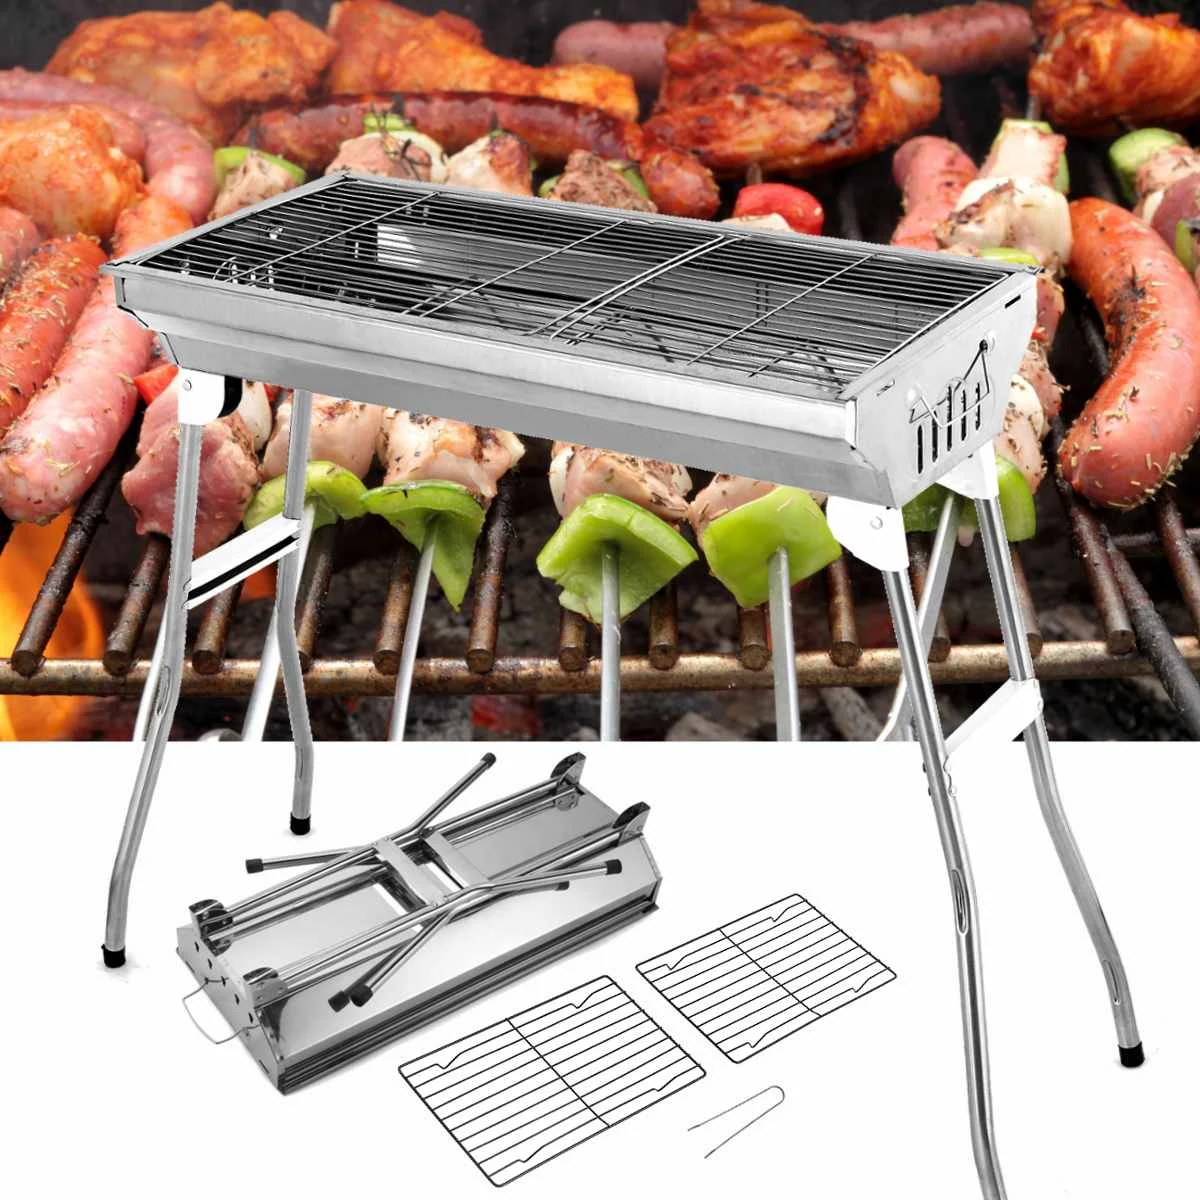 

Portable Smokeless BBQ Grilling Rack Fold Barbecue Charcoal Grill Stove Shish Kebab Stainless Steel BBQ For Home Garden Dining